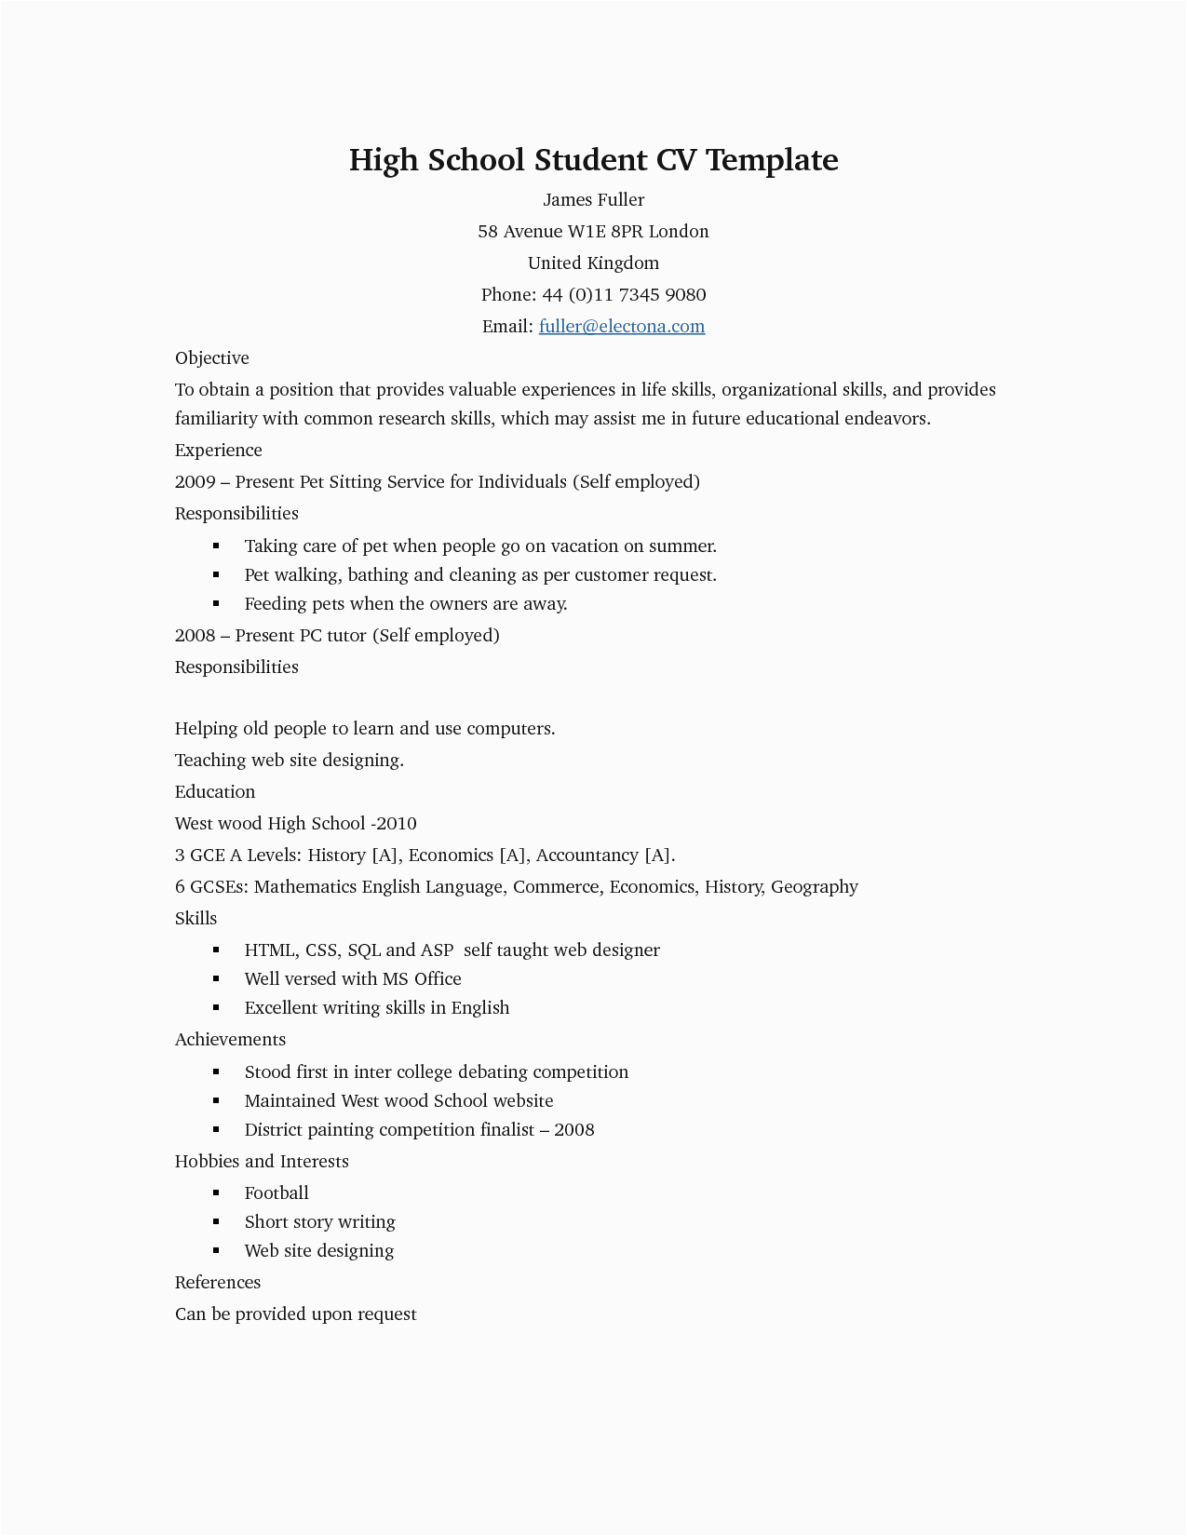 High School Resume Template for First Job First Job High School Resume Sample Good Resume Examples